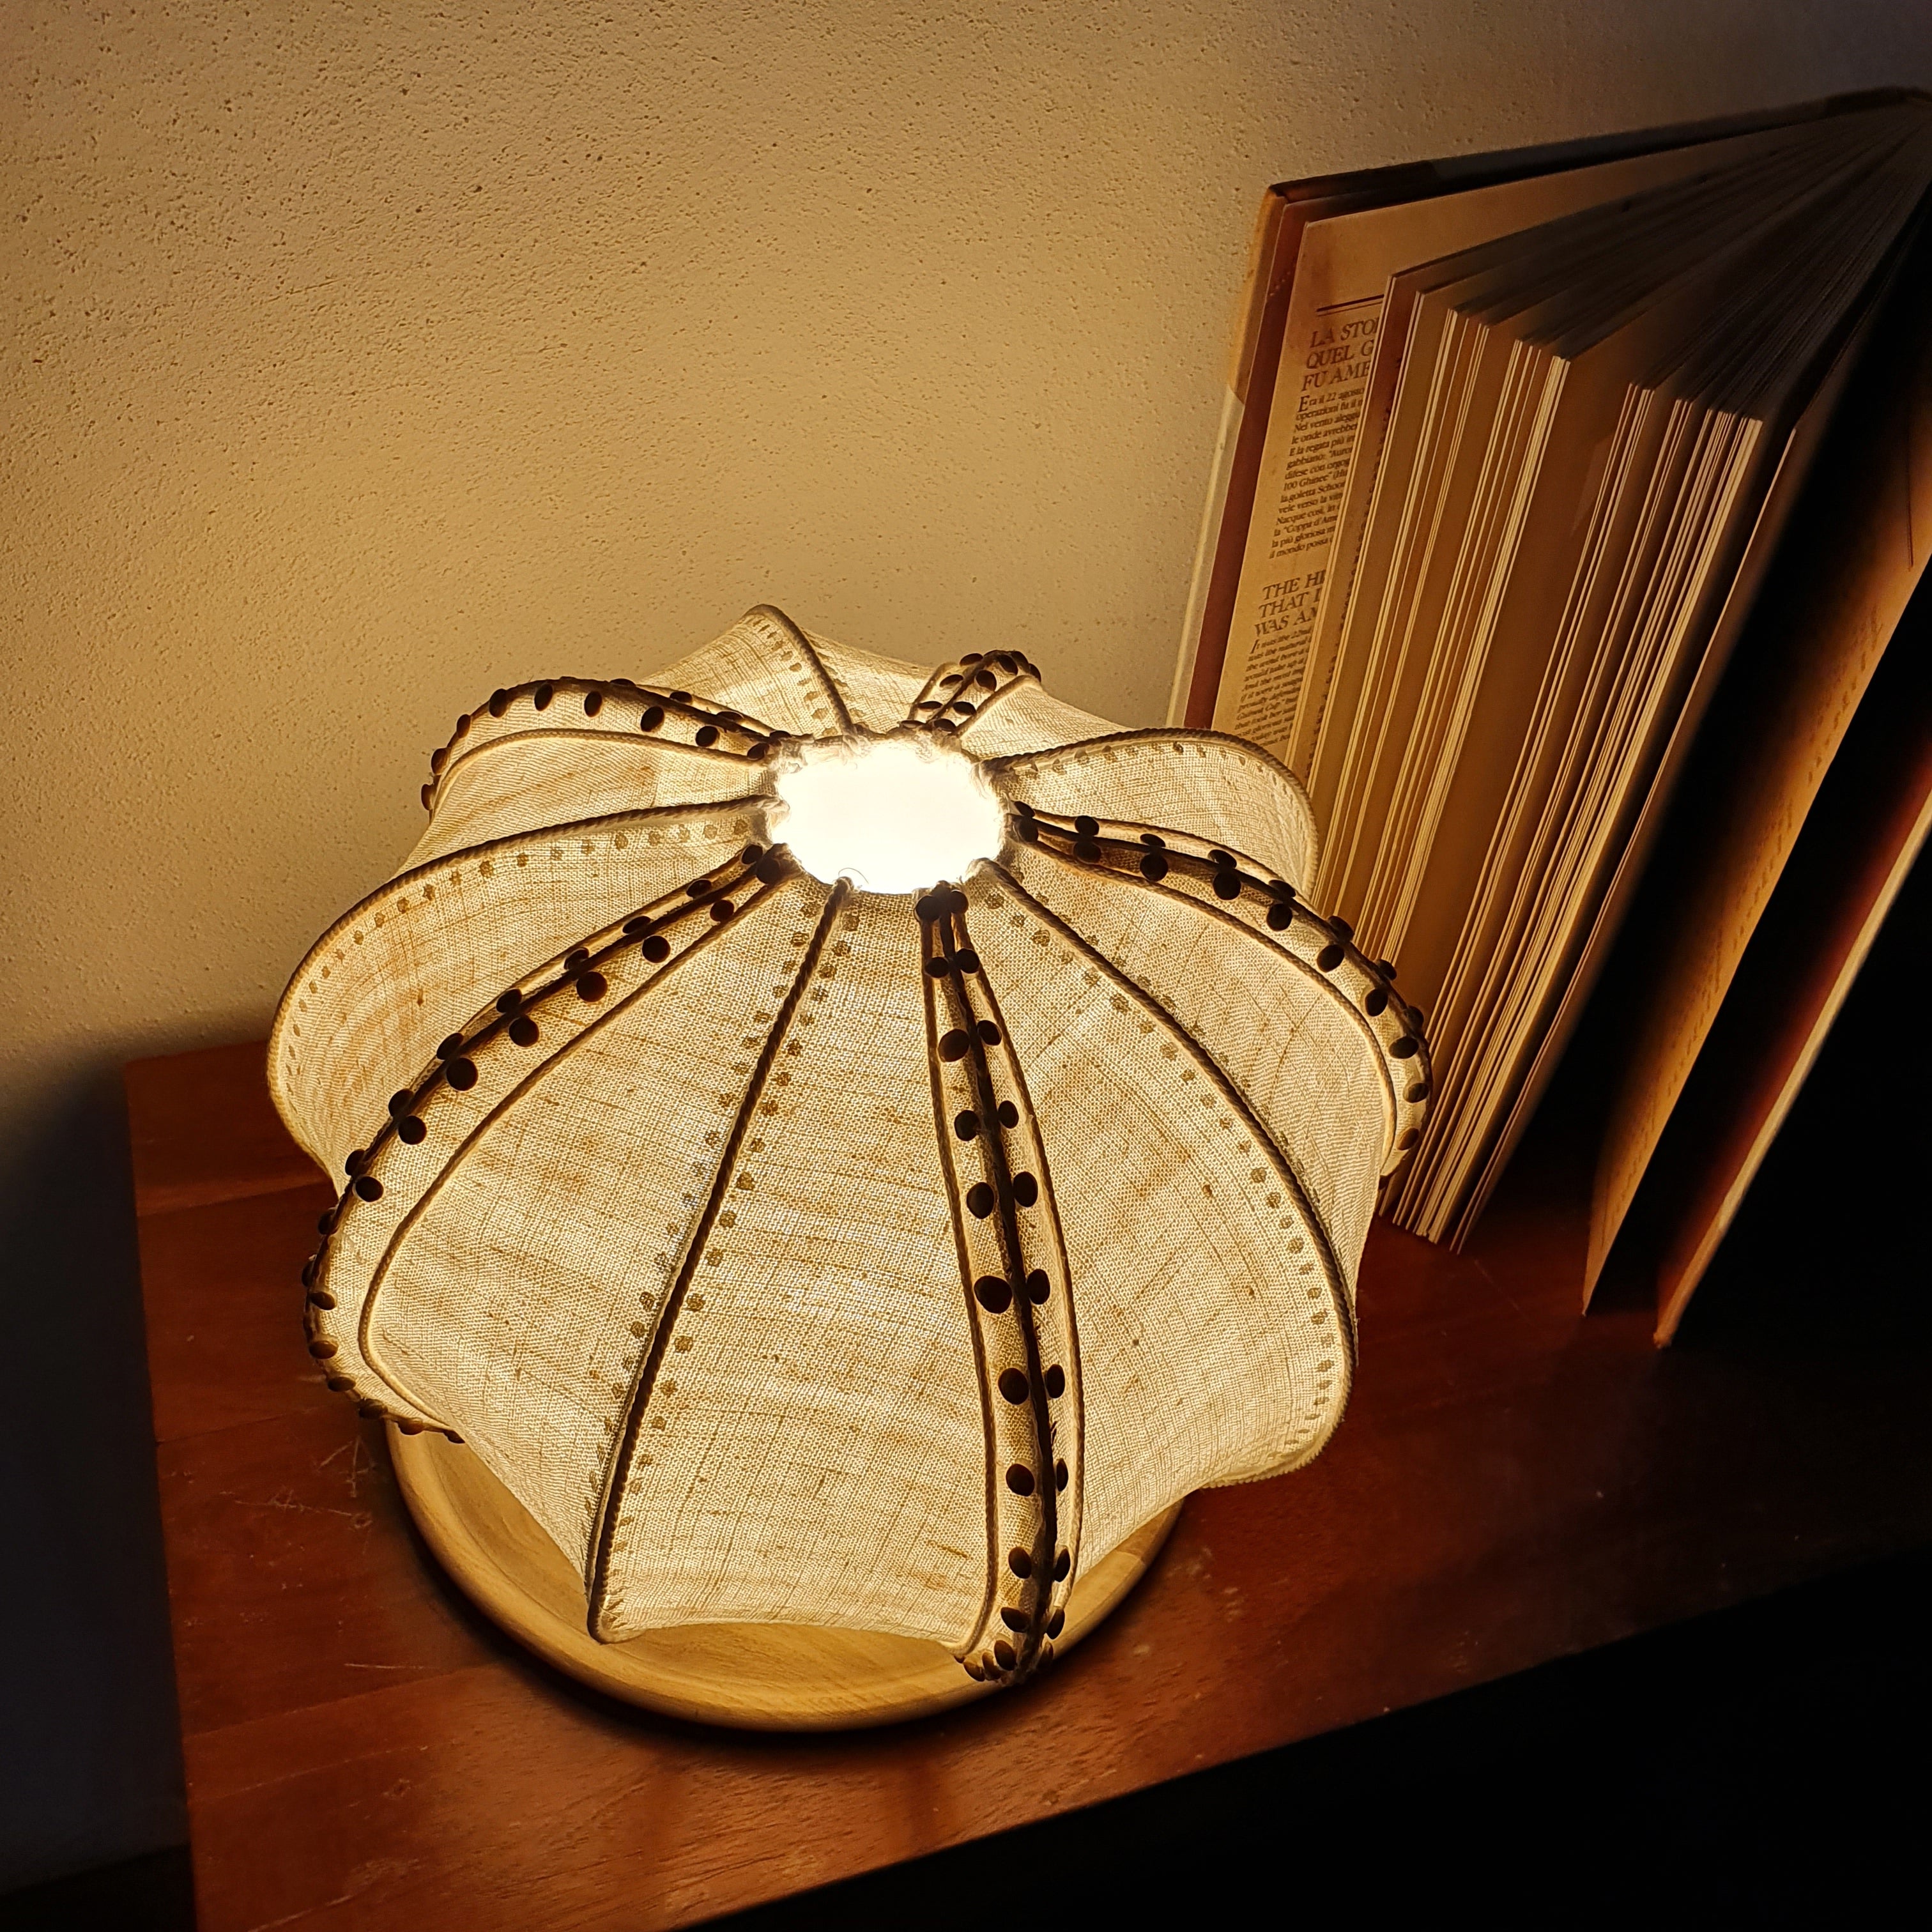 Sea Urchin Lamp with Wooden Base